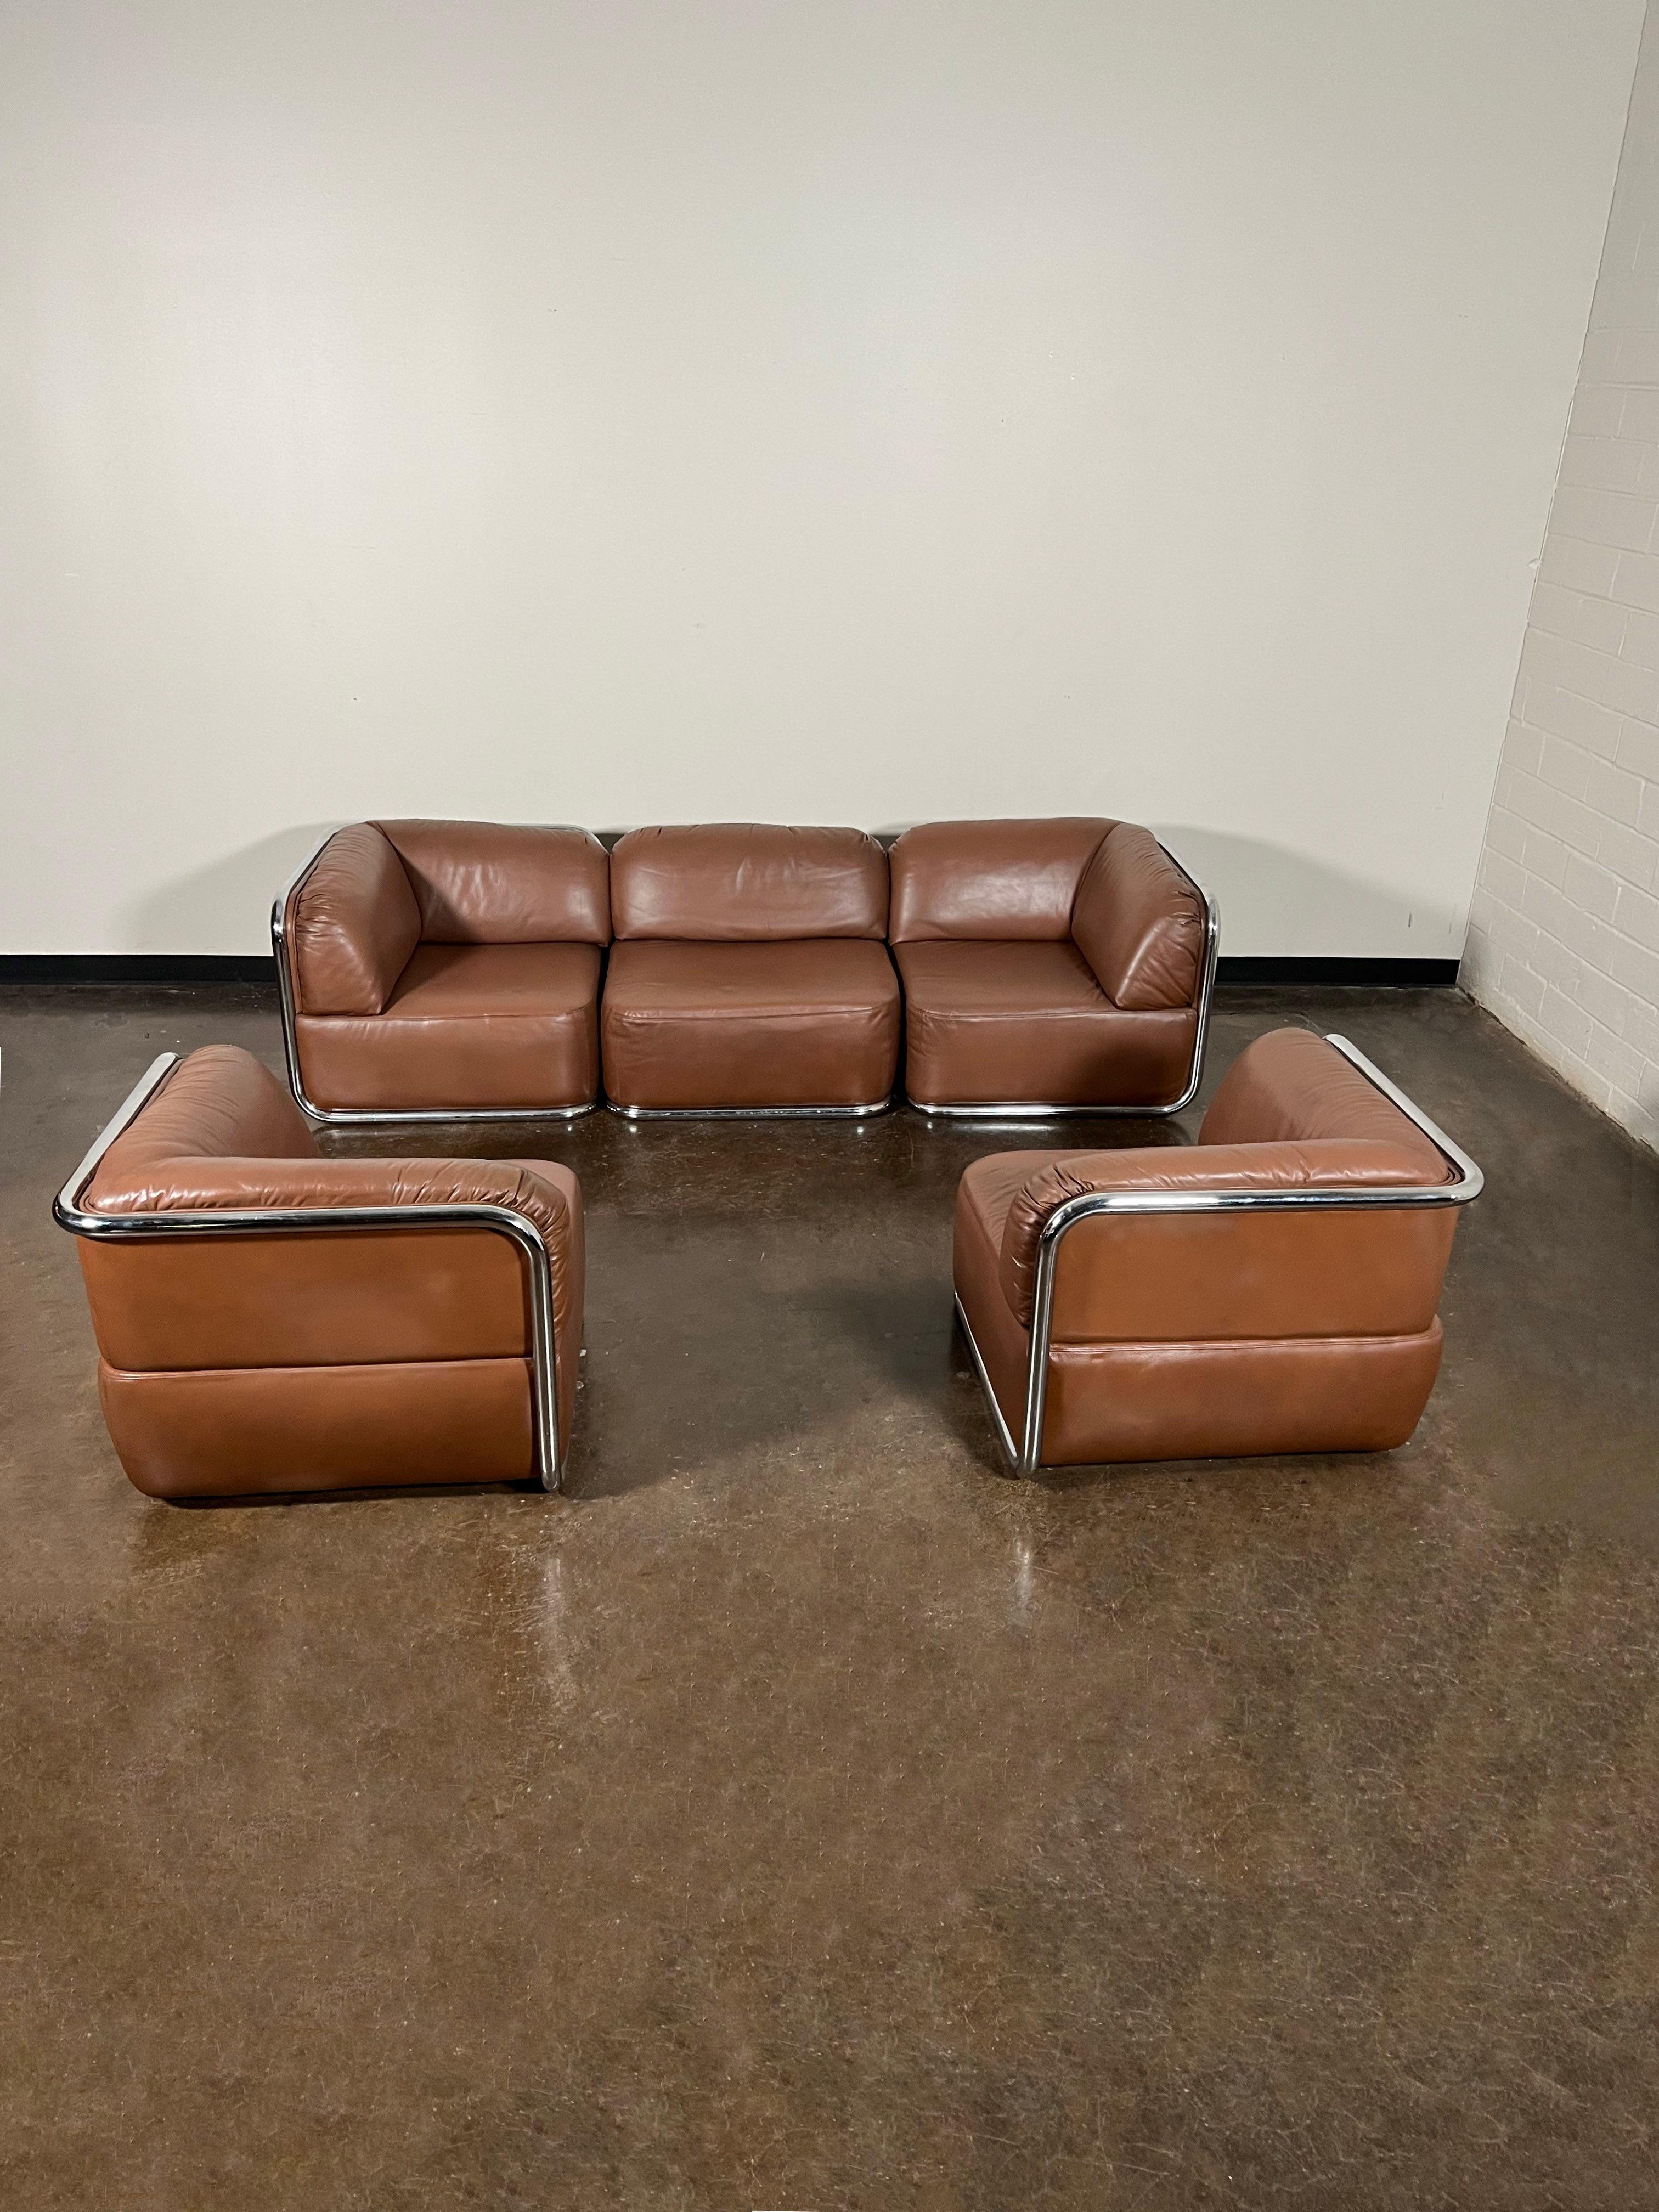  'Element' Sectional Set by Geoffrey Harcourt for Artifort, 1973, Signed  8